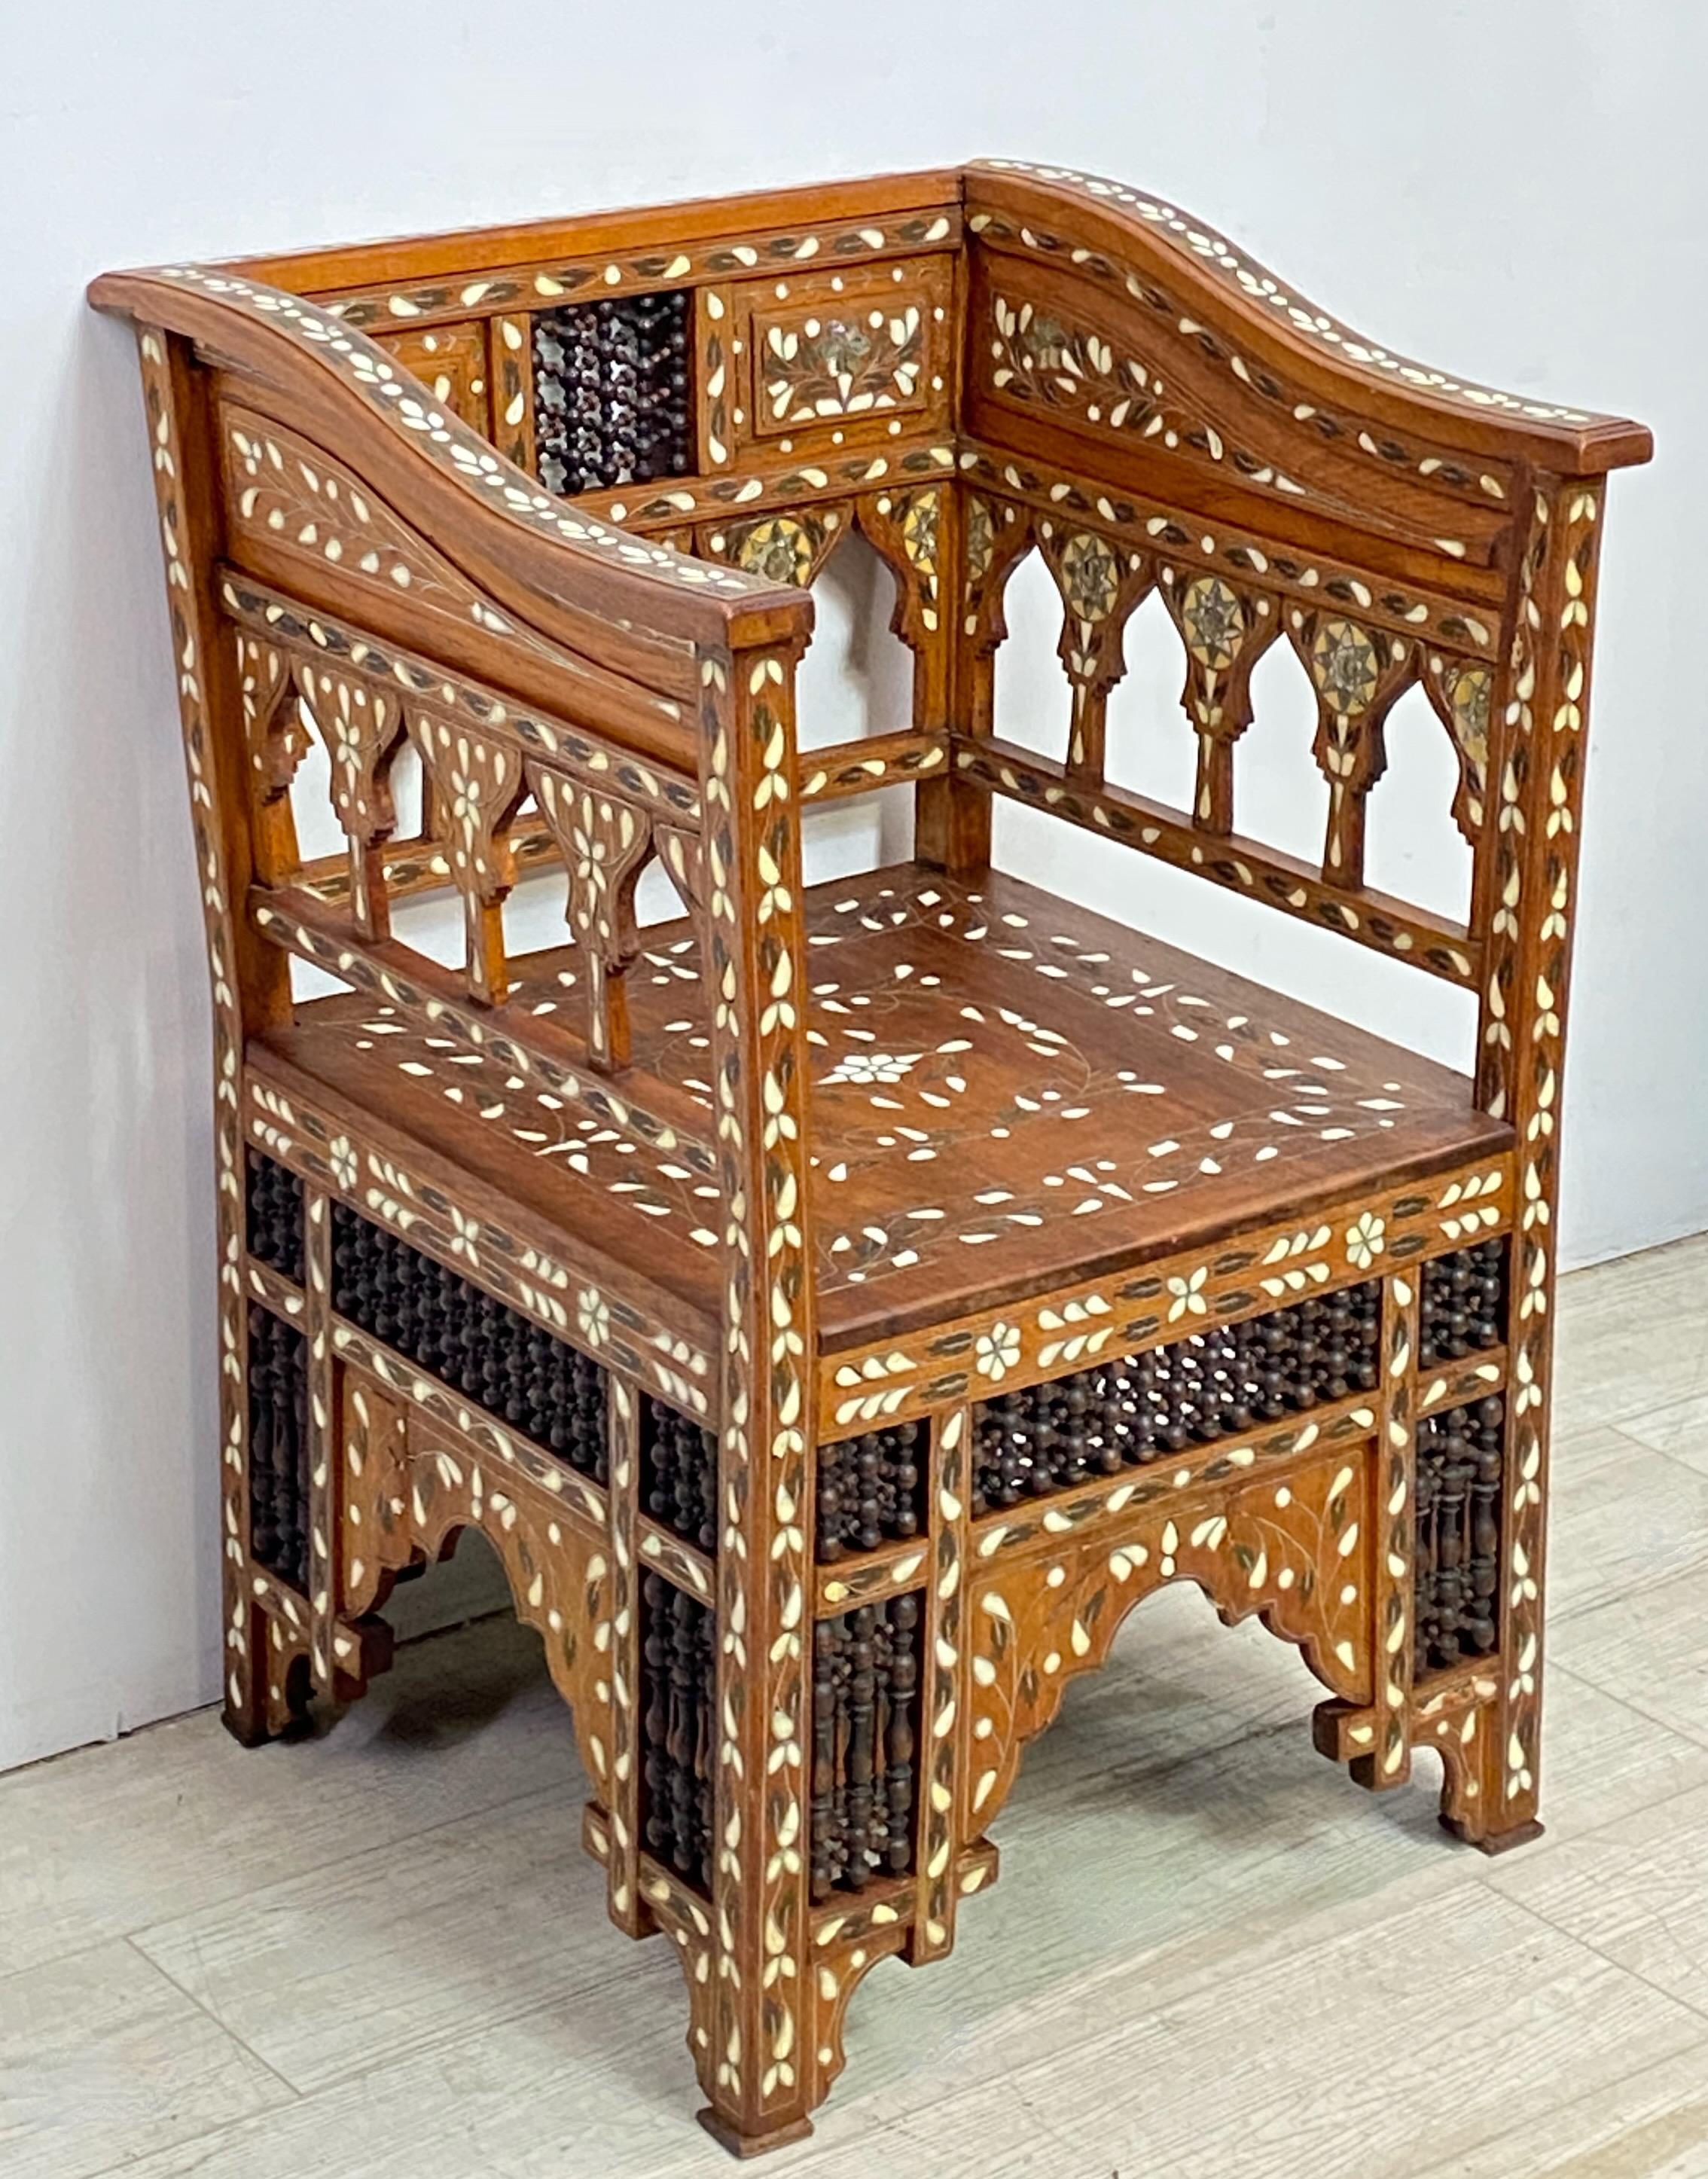 A highly decorative example of a Late 19th / Early 20th Century hand carved Syrian Moorish style armchair with velvet and appliqué cushion. Walnut with hand turned fretwork and elaborate inlay detail of brass, bone, and mother of pearl.
Sturdy and